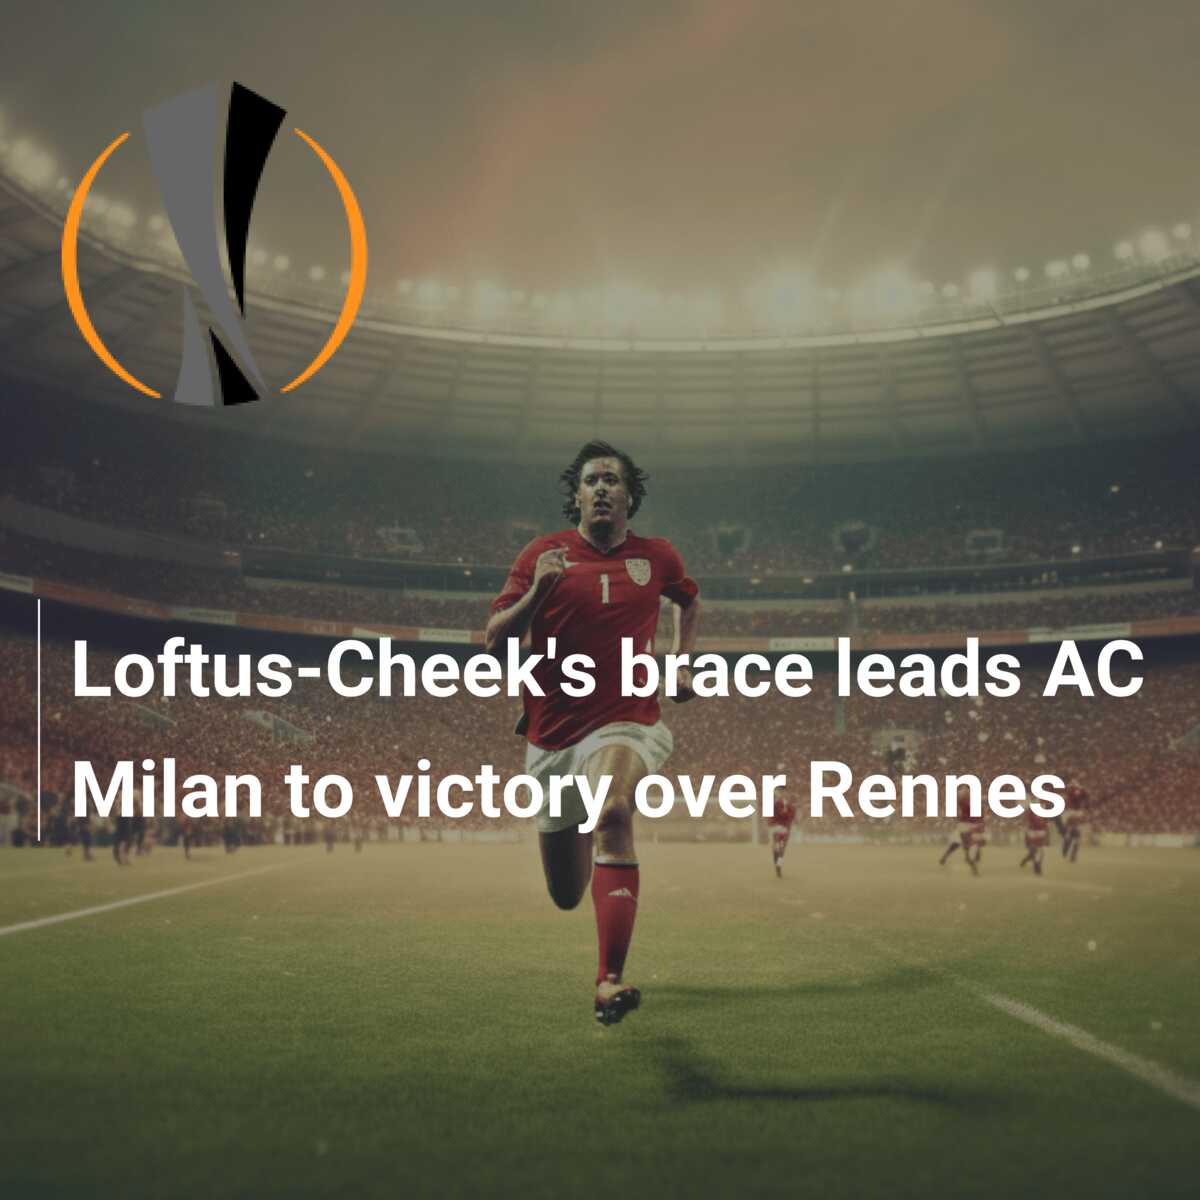 Loftus-Cheek's brace leads AC Milan to victory over Rennes 